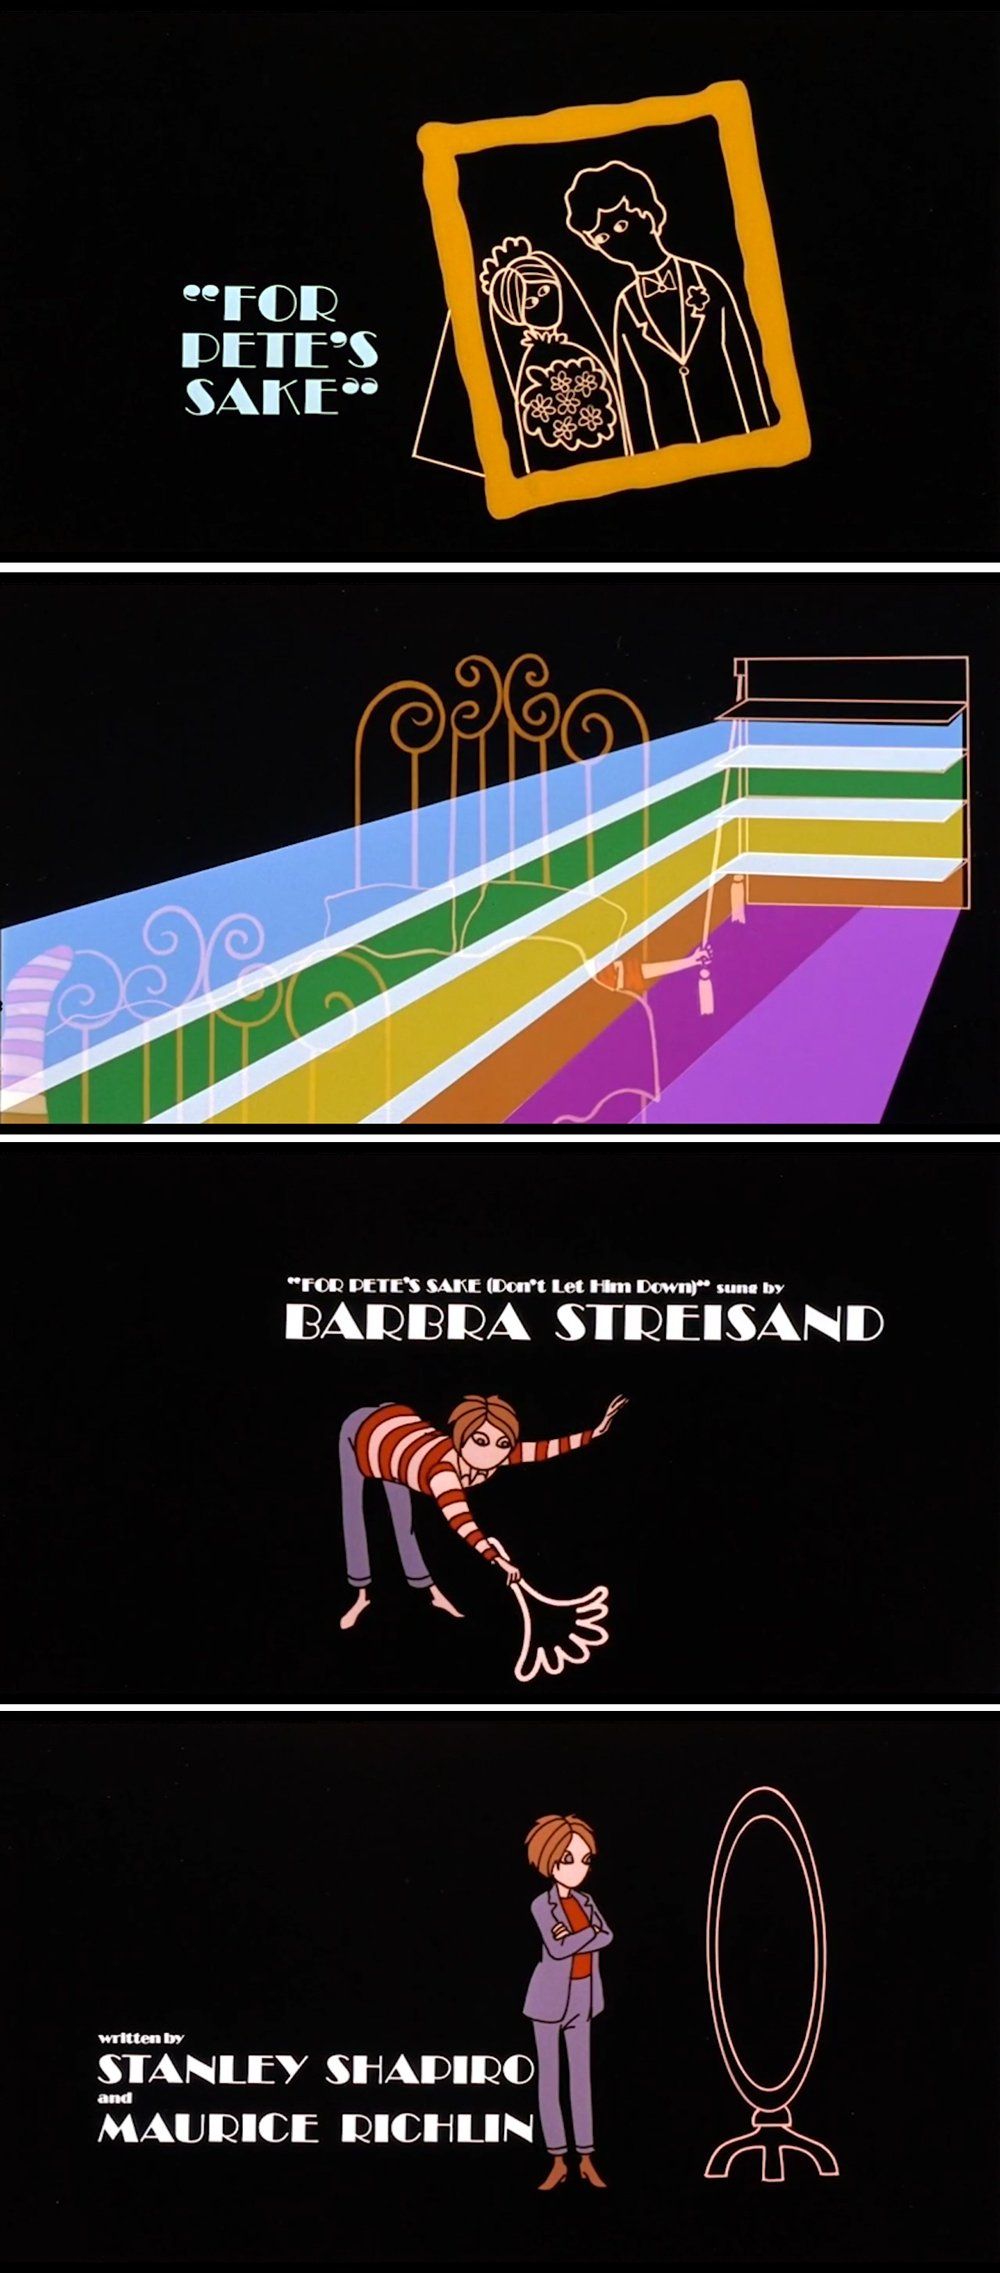 Frames from the animated opening credits of the movie.